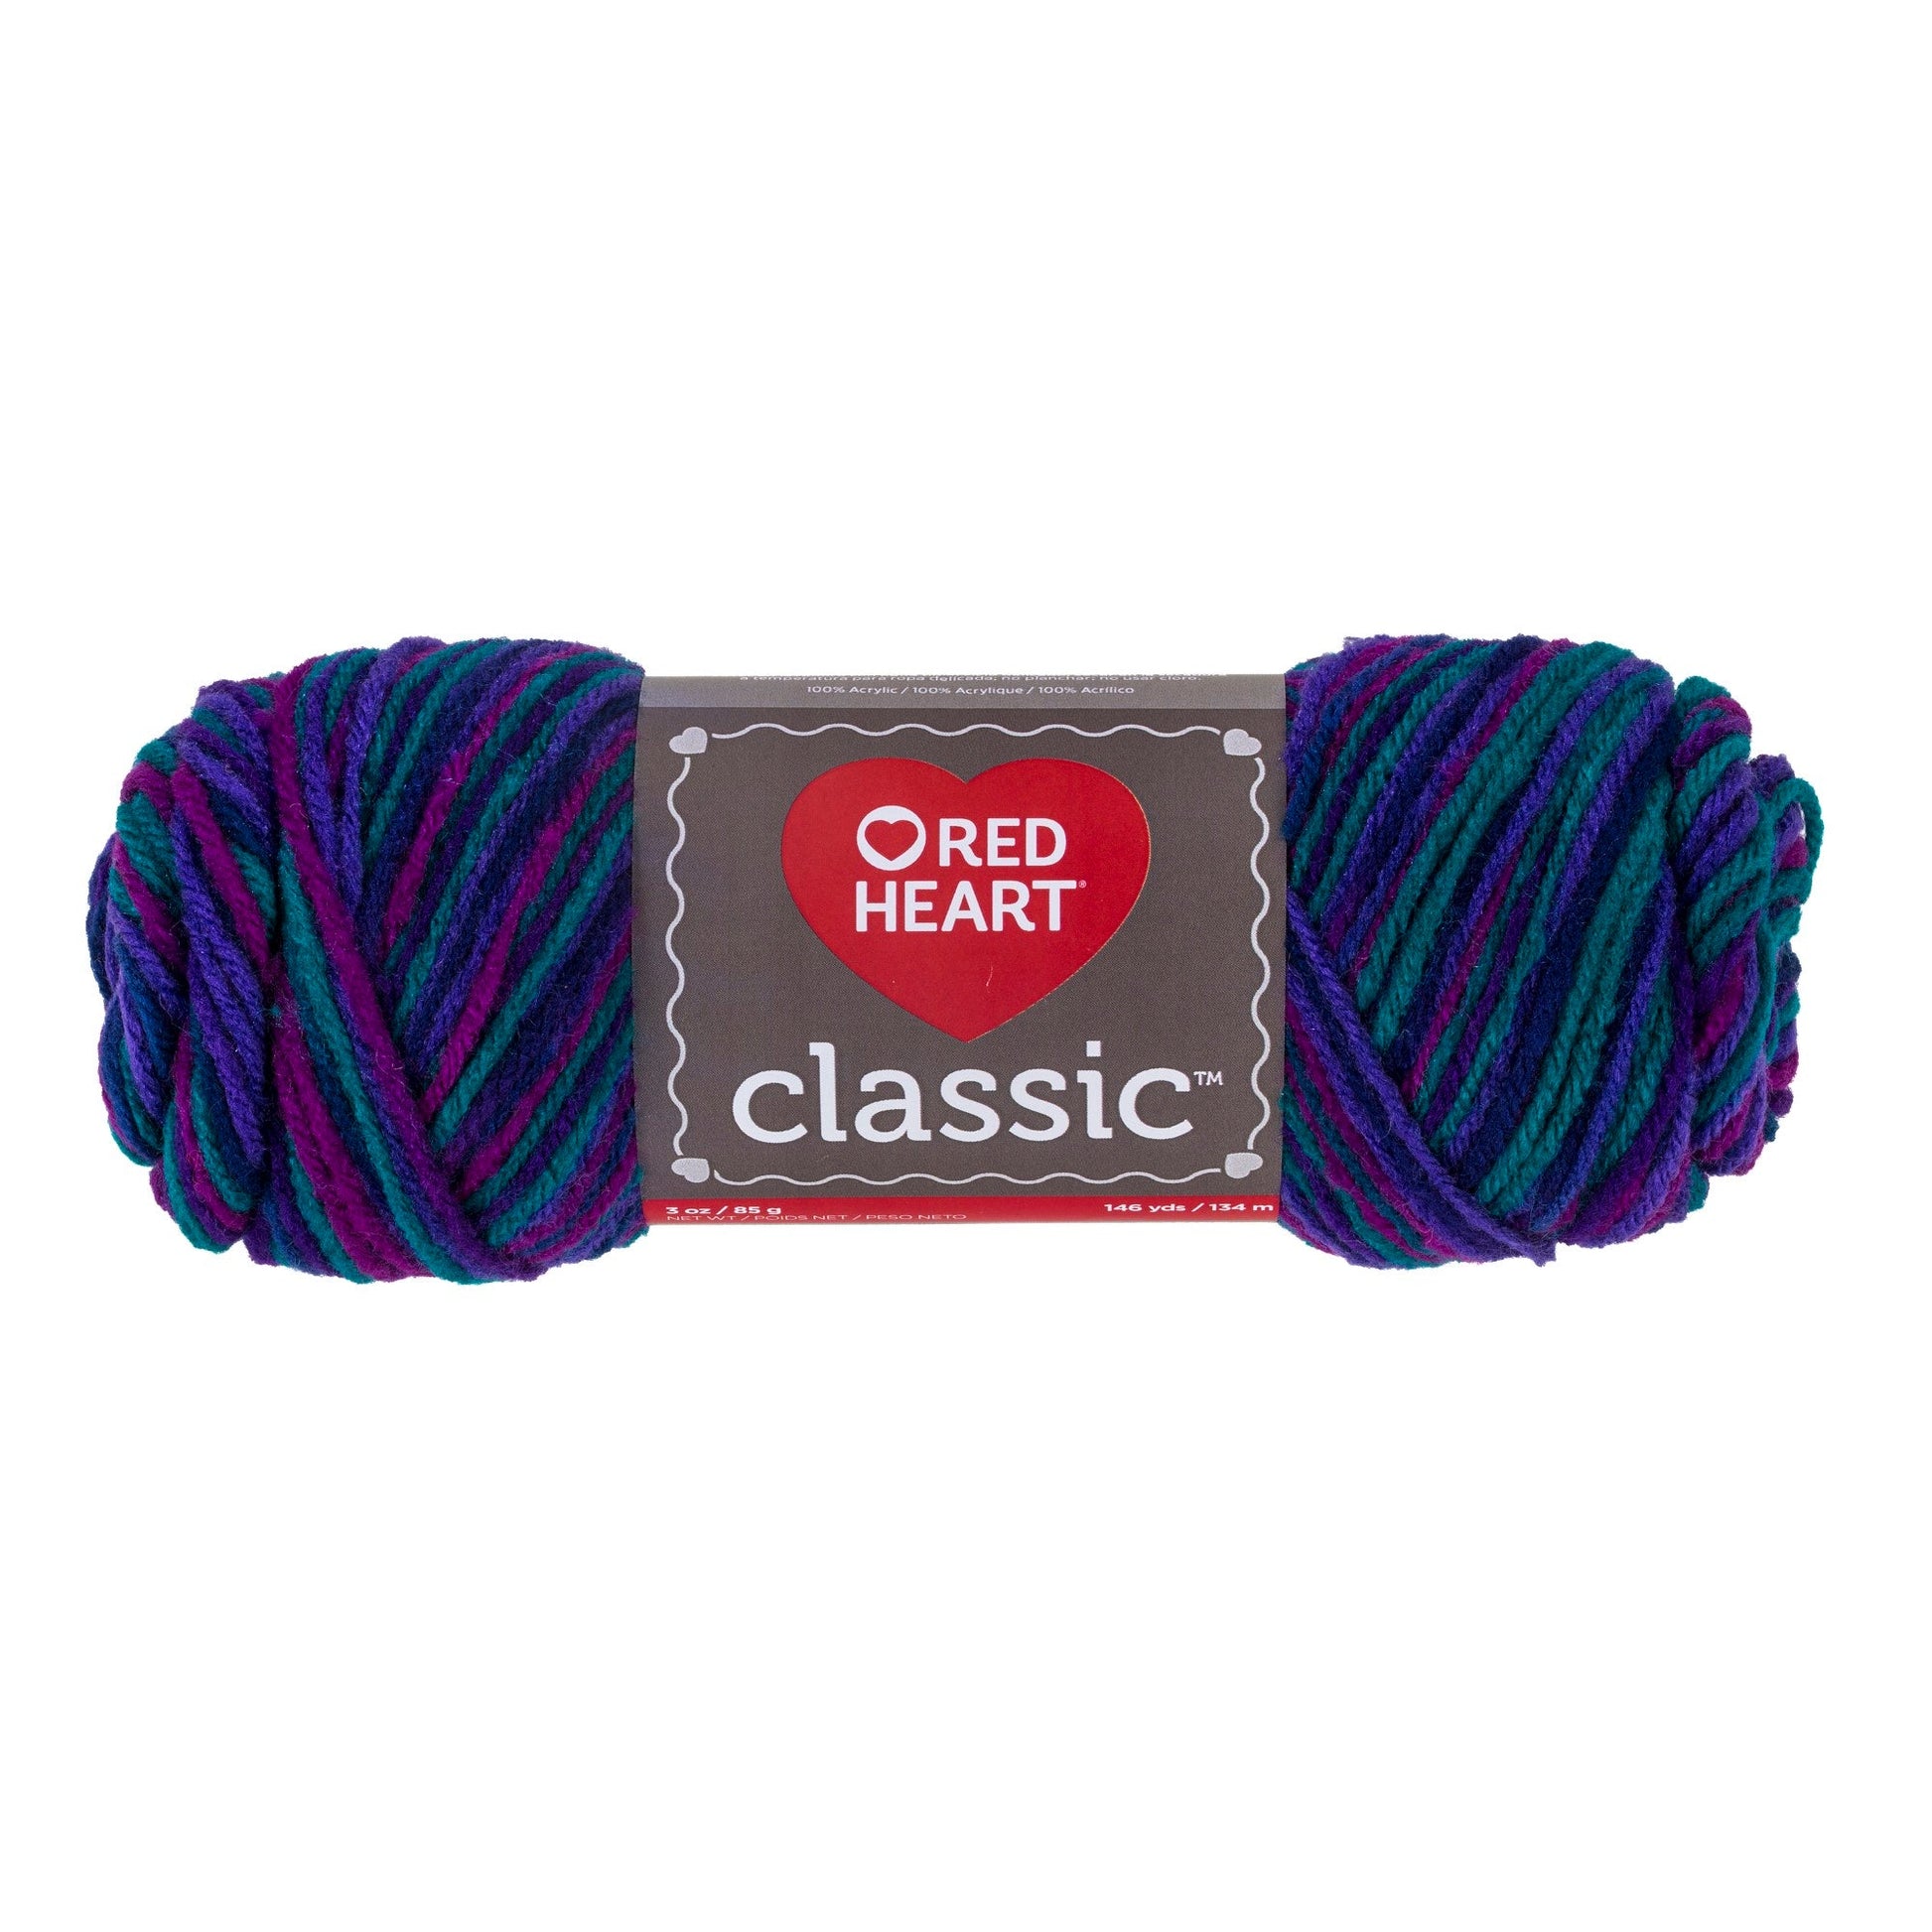 Red Heart Classic Yarn Yellow 073650629020 for sale online